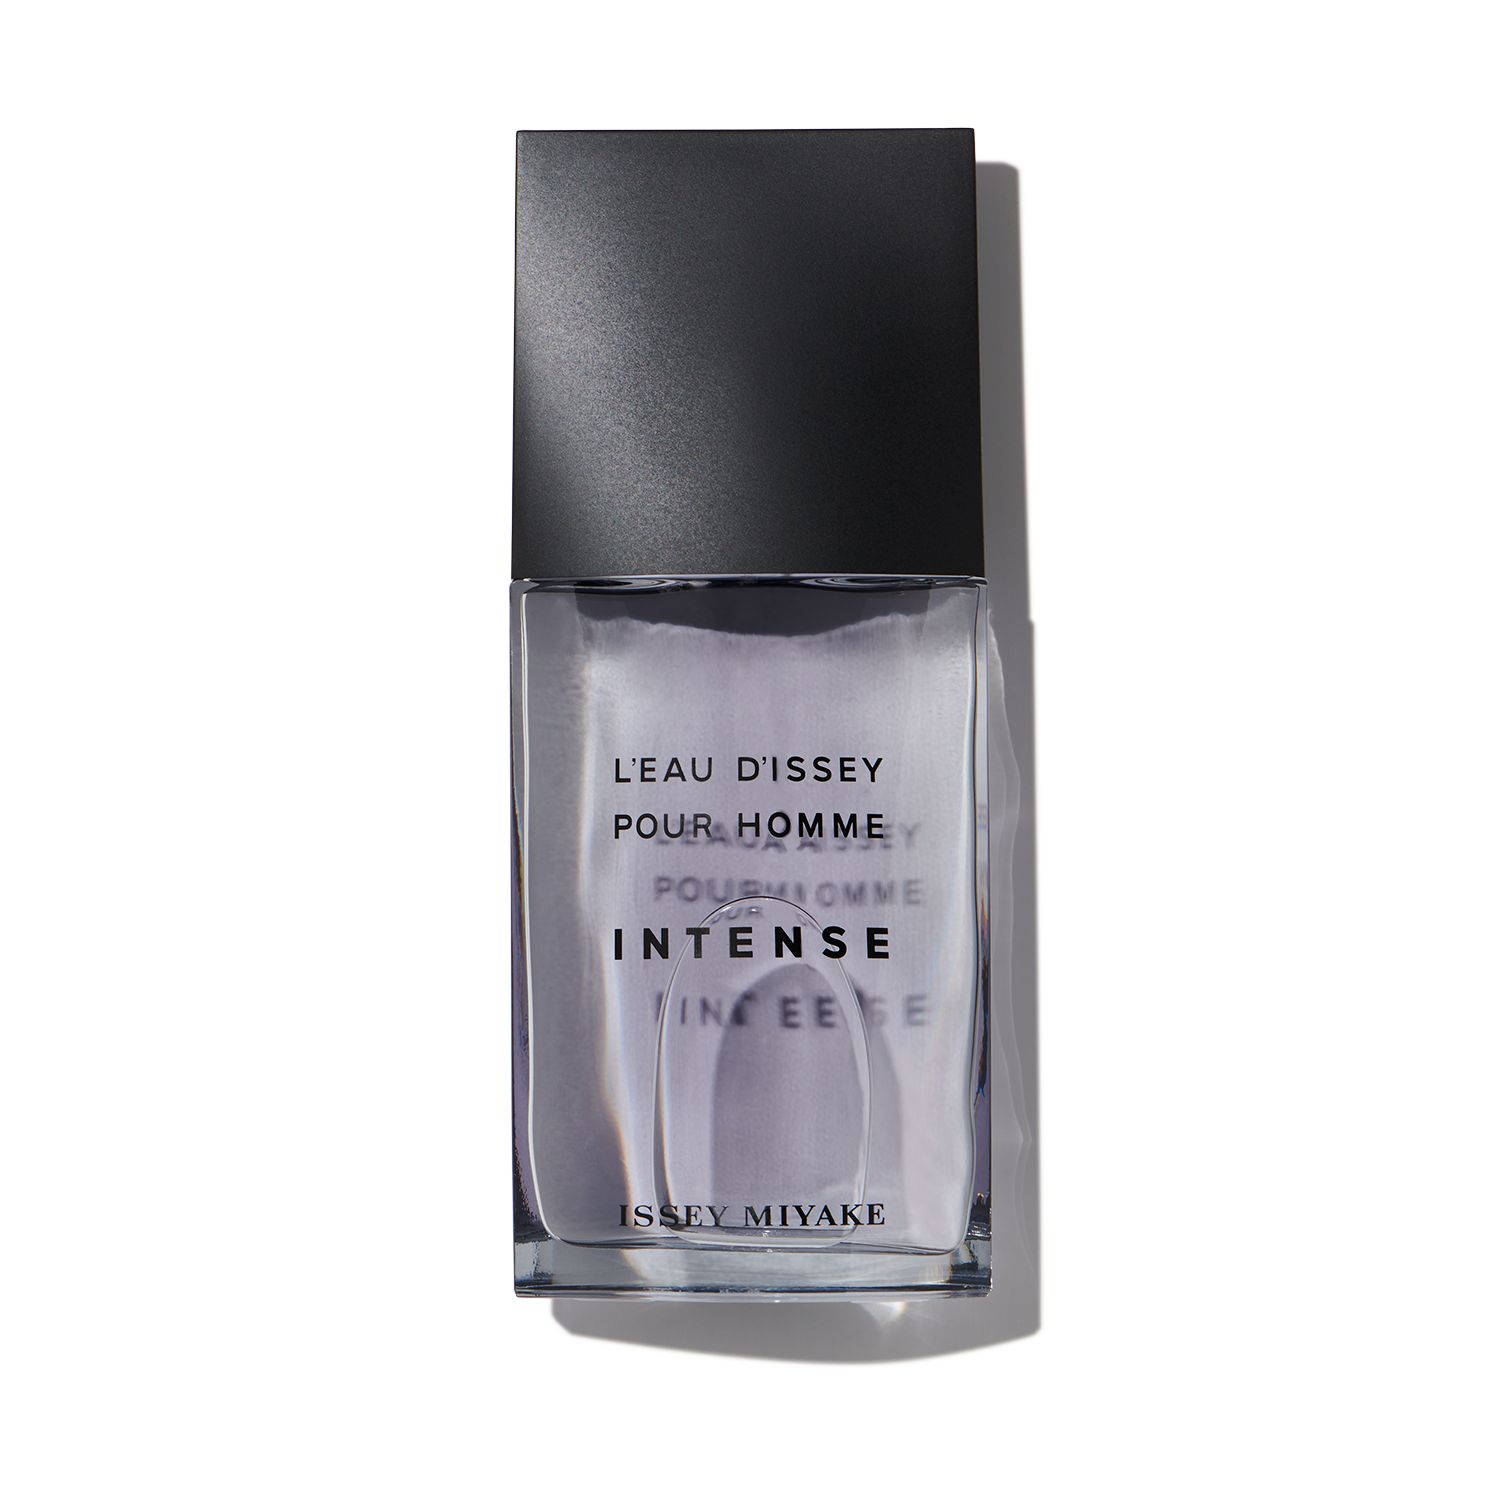 Issey Miyake L'Eau d'Issey Pour Homme for per month | Scentbird